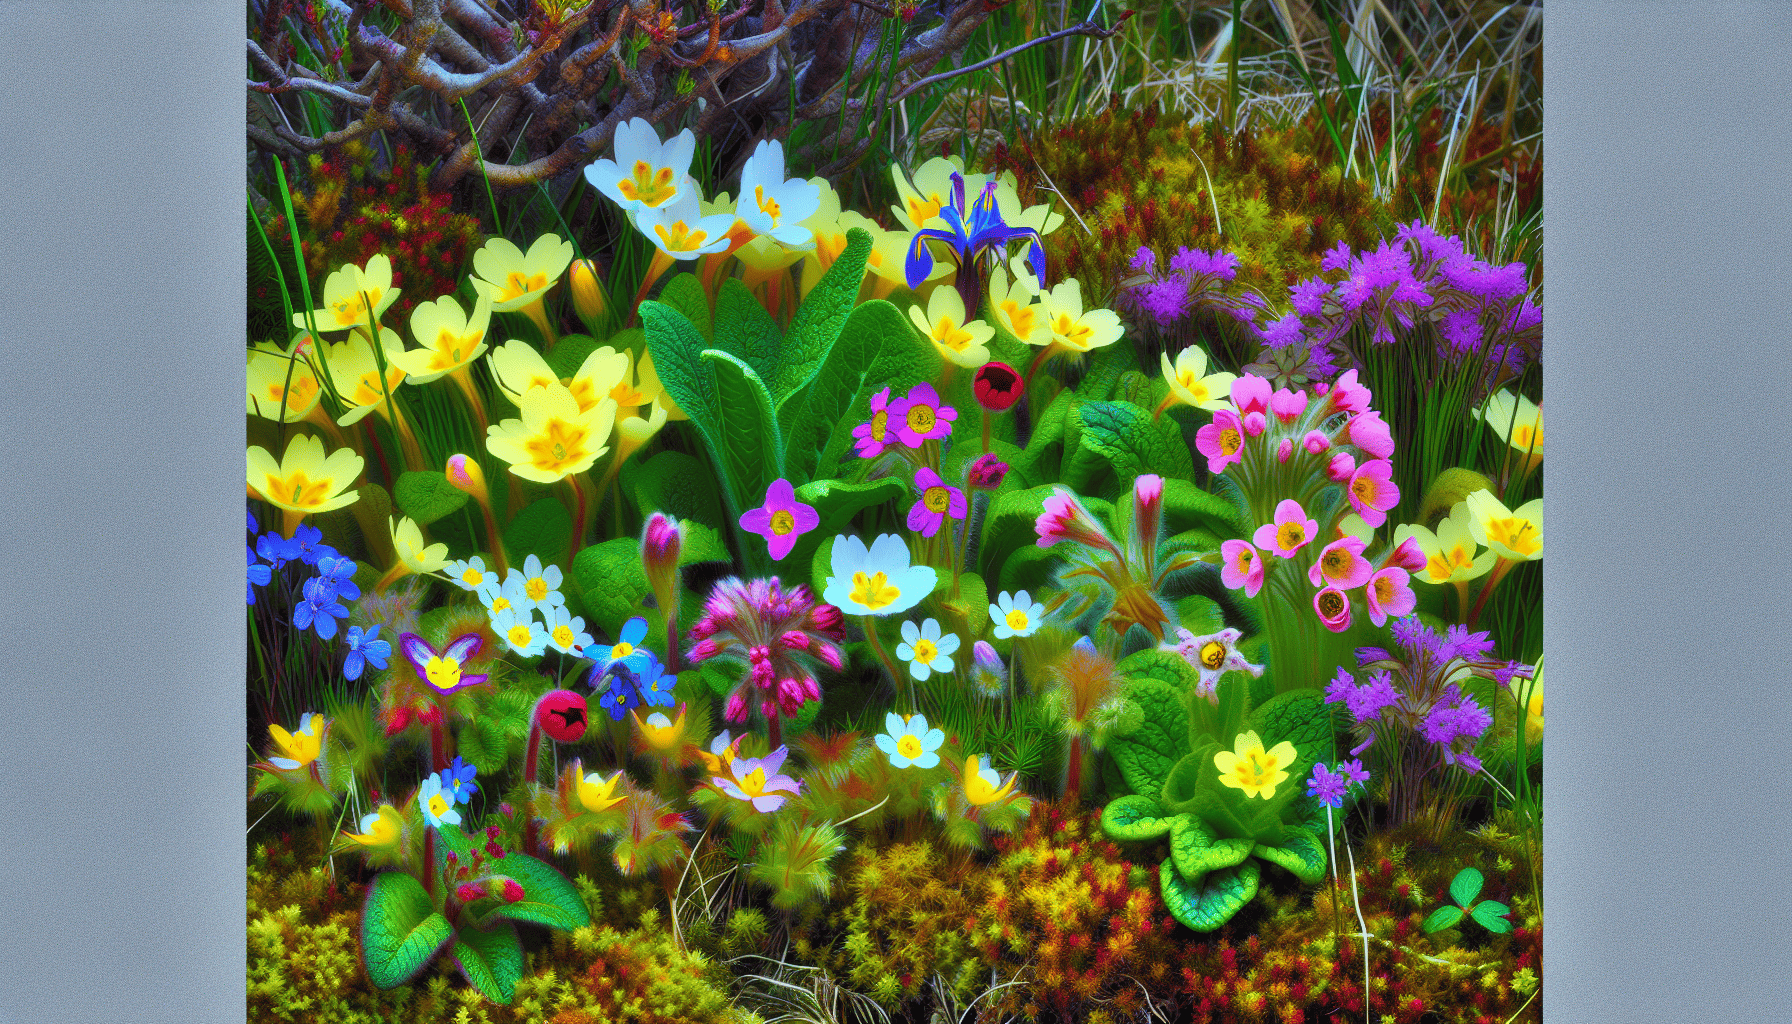 A photo of enchanting native wildflowers of Ireland